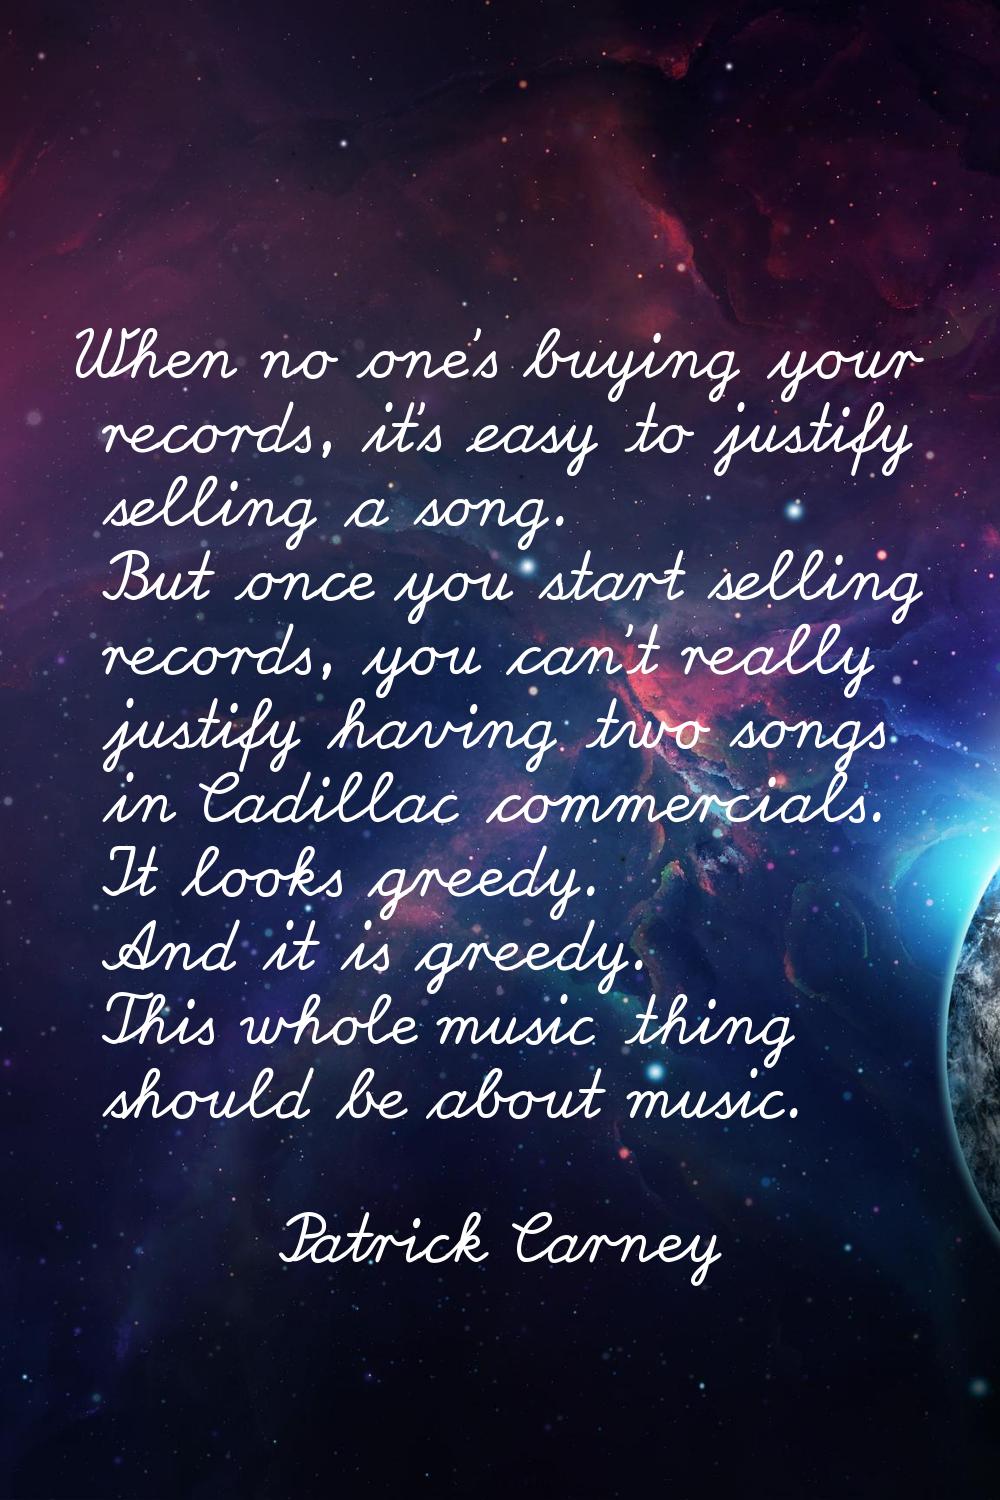 When no one's buying your records, it's easy to justify selling a song. But once you start selling 